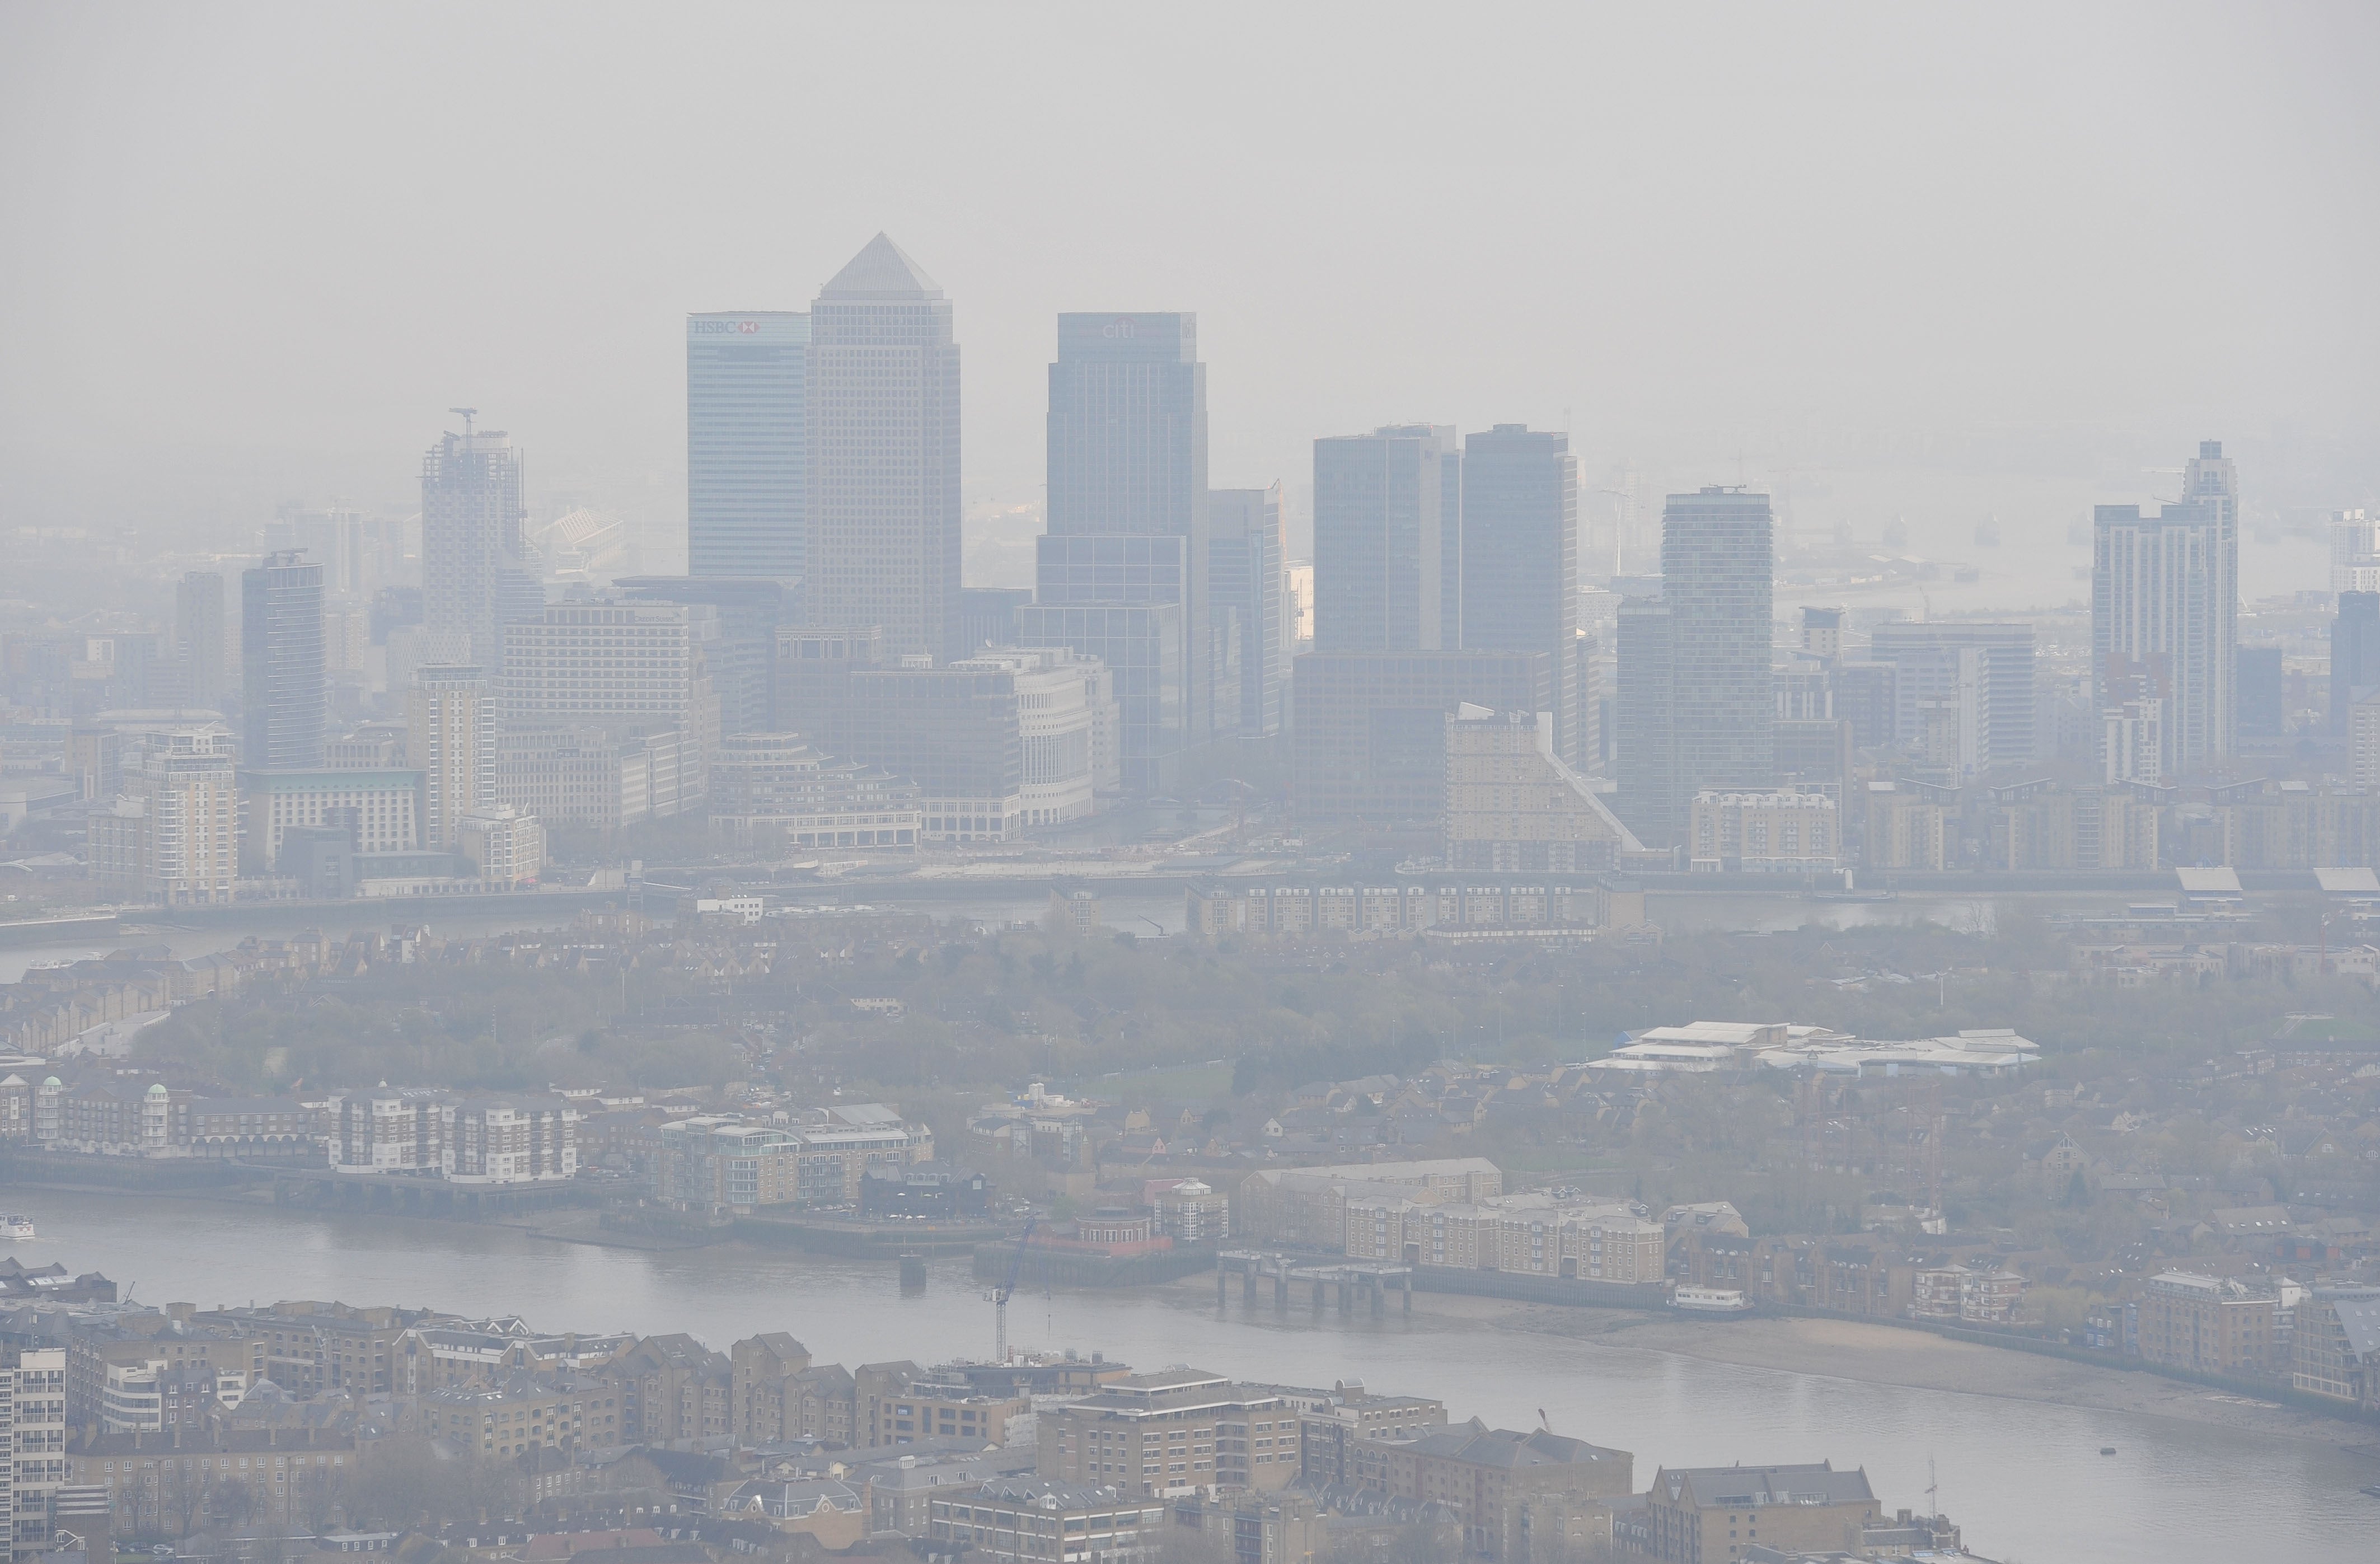 Ms Adoo-Kissi-Debrah has warned politicians must not row back on pollution rules (Nicholas T Ansell/PA)